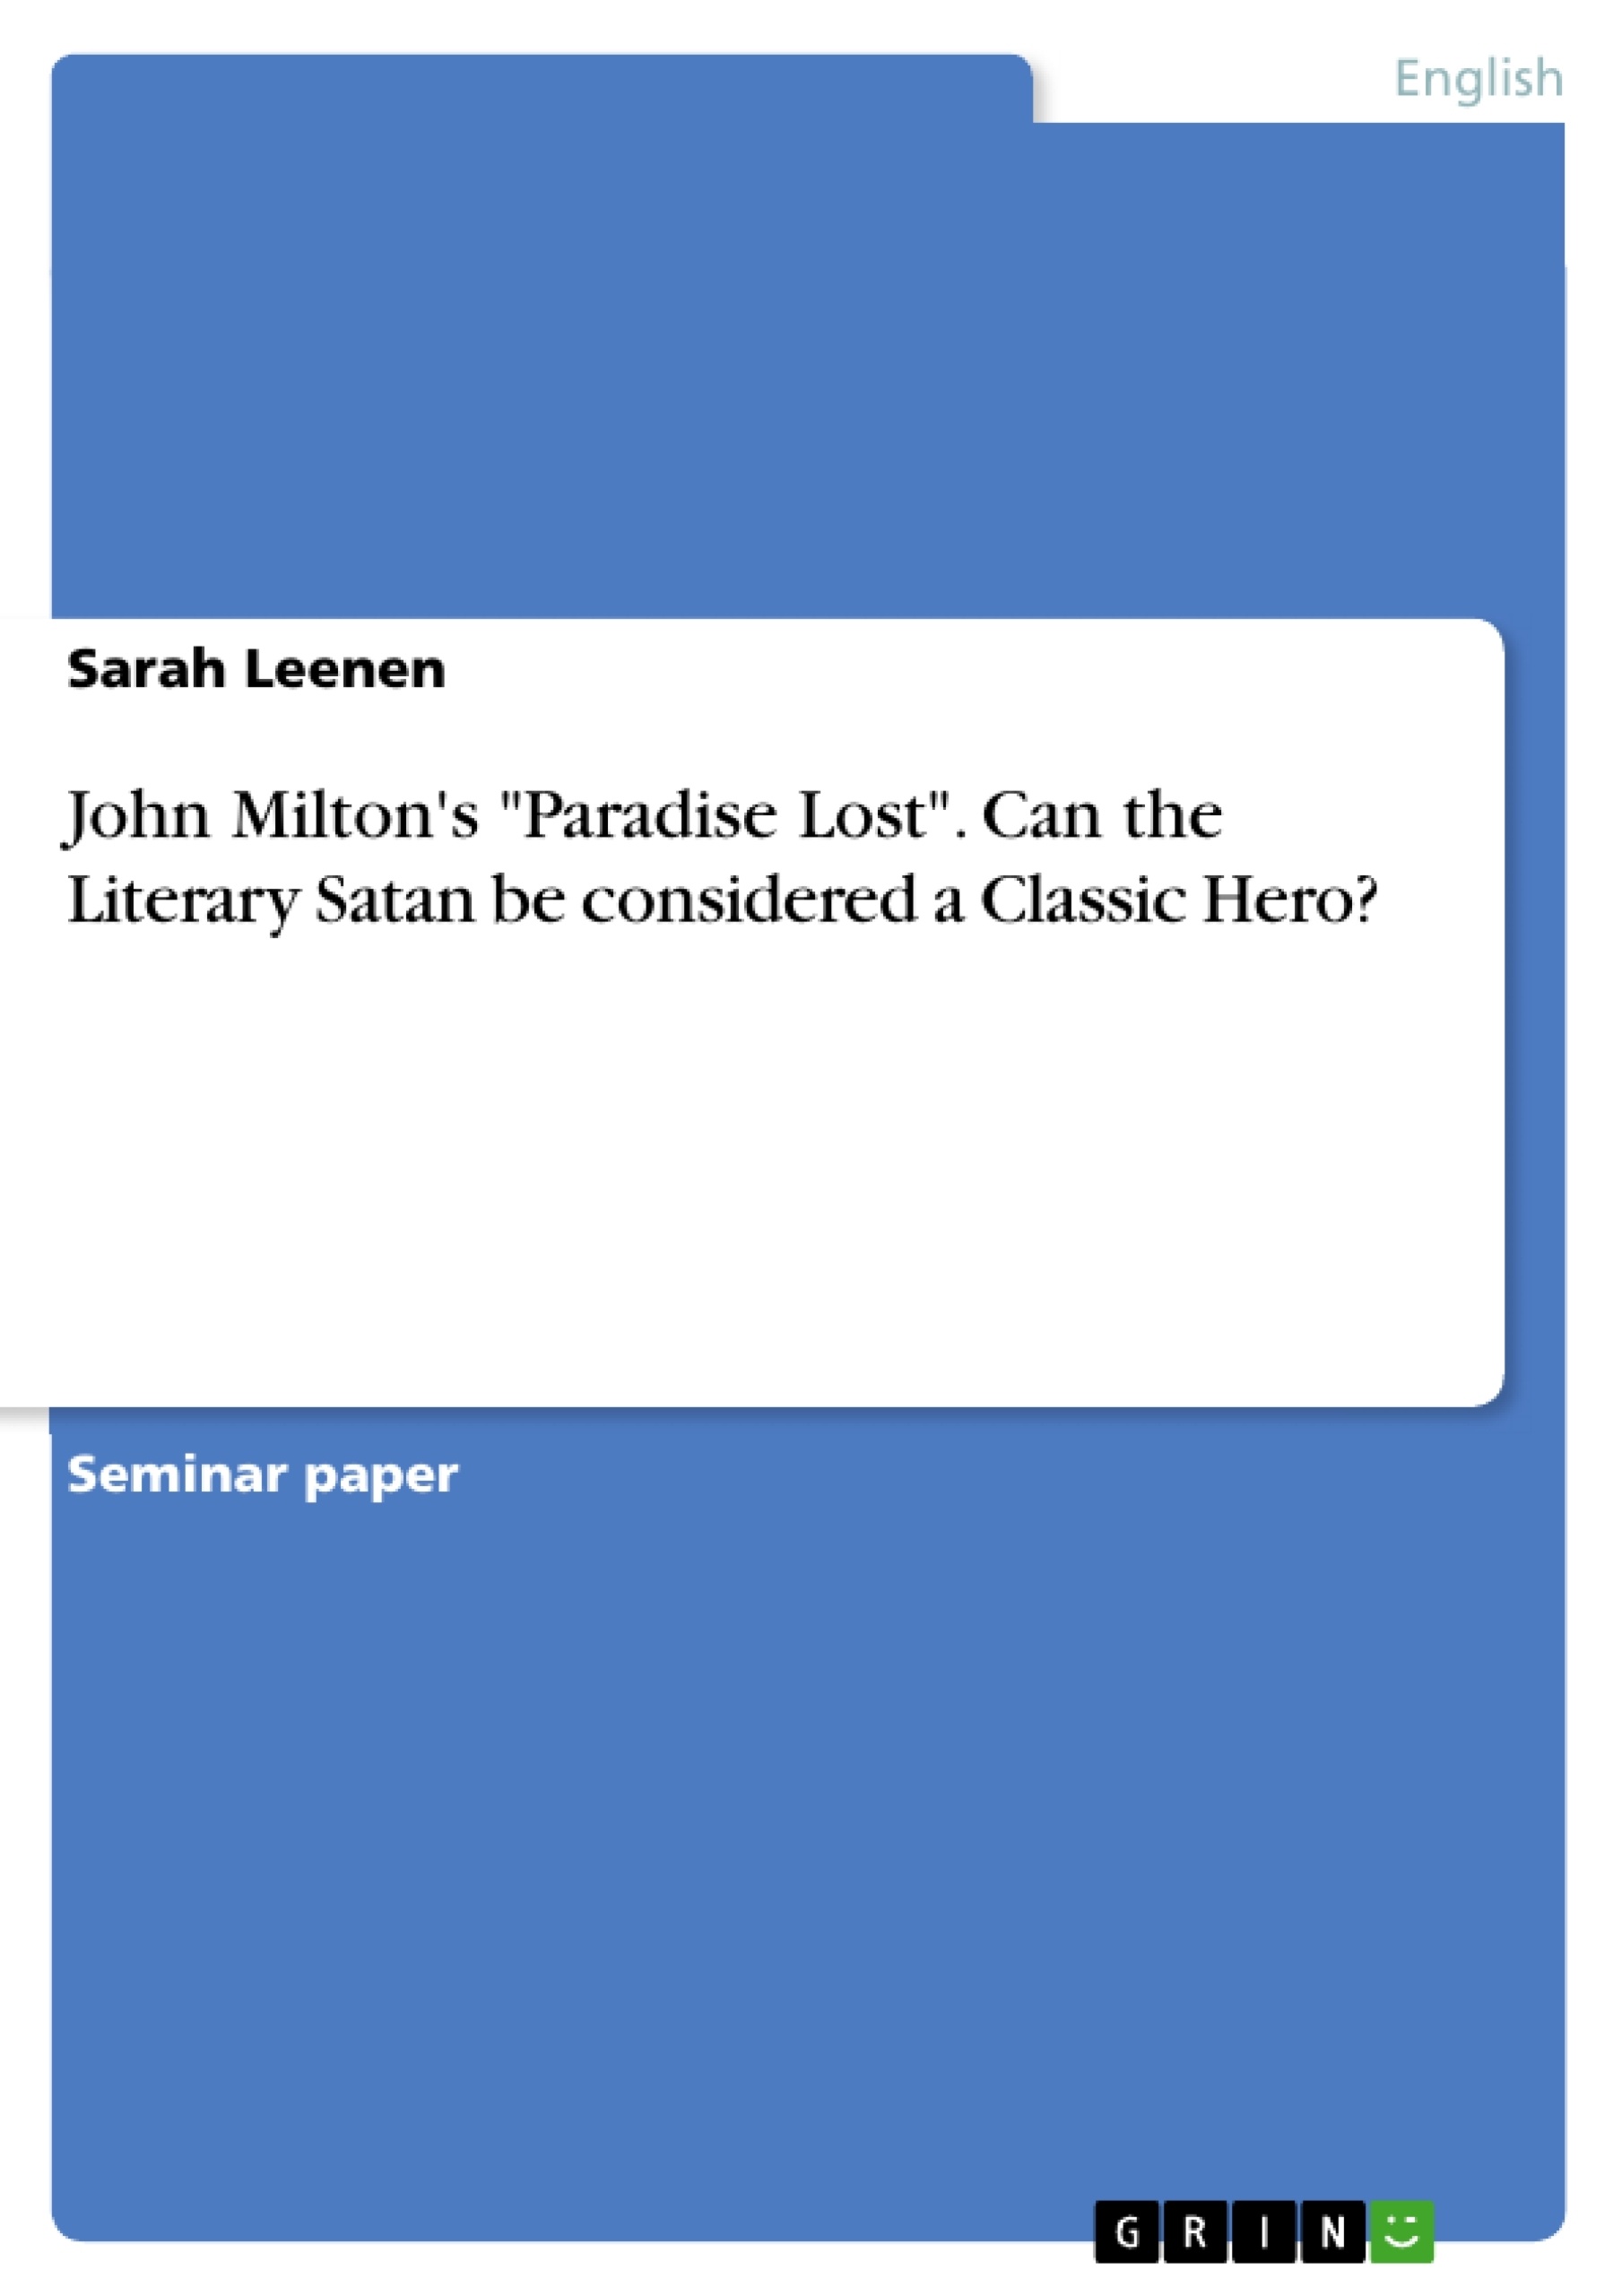 Titre: John Milton's "Paradise Lost". Can the Literary Satan be considered a Classic Hero?